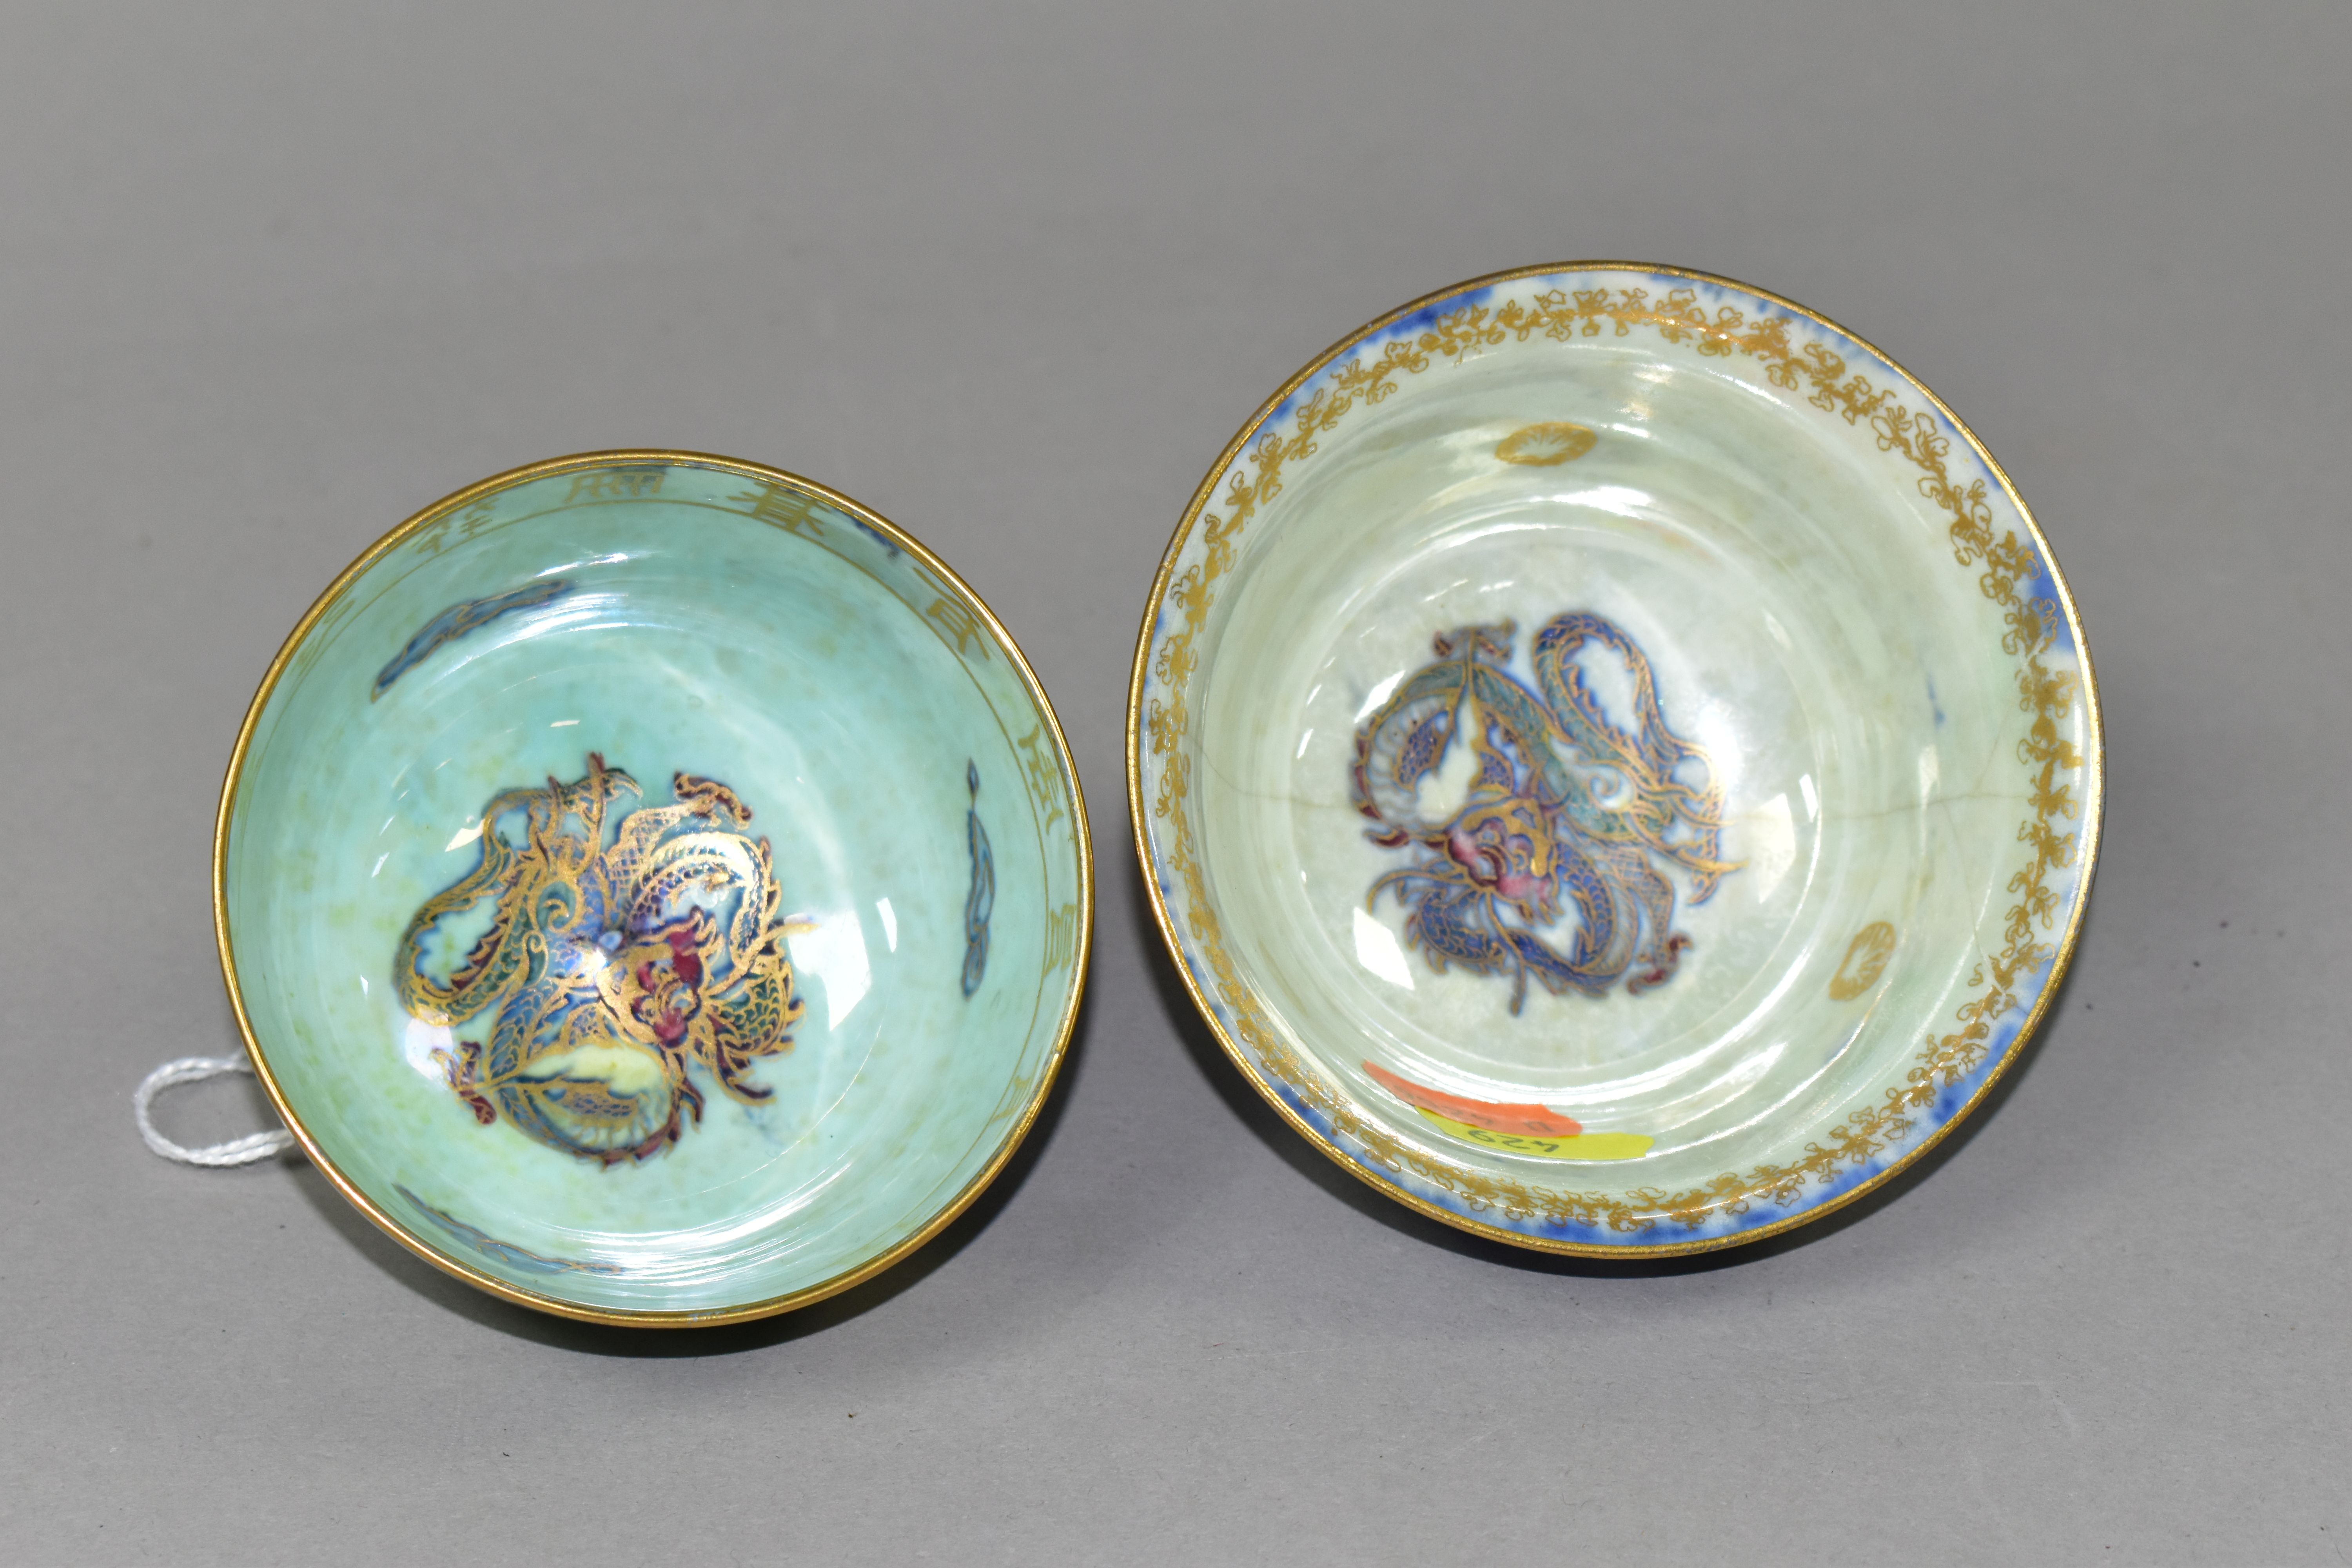 TWO WEDGWOOD BONE CHINA LUSTRE BOWLS, comprising a bowl with a blue mottled lustre exterior with a - Image 4 of 7